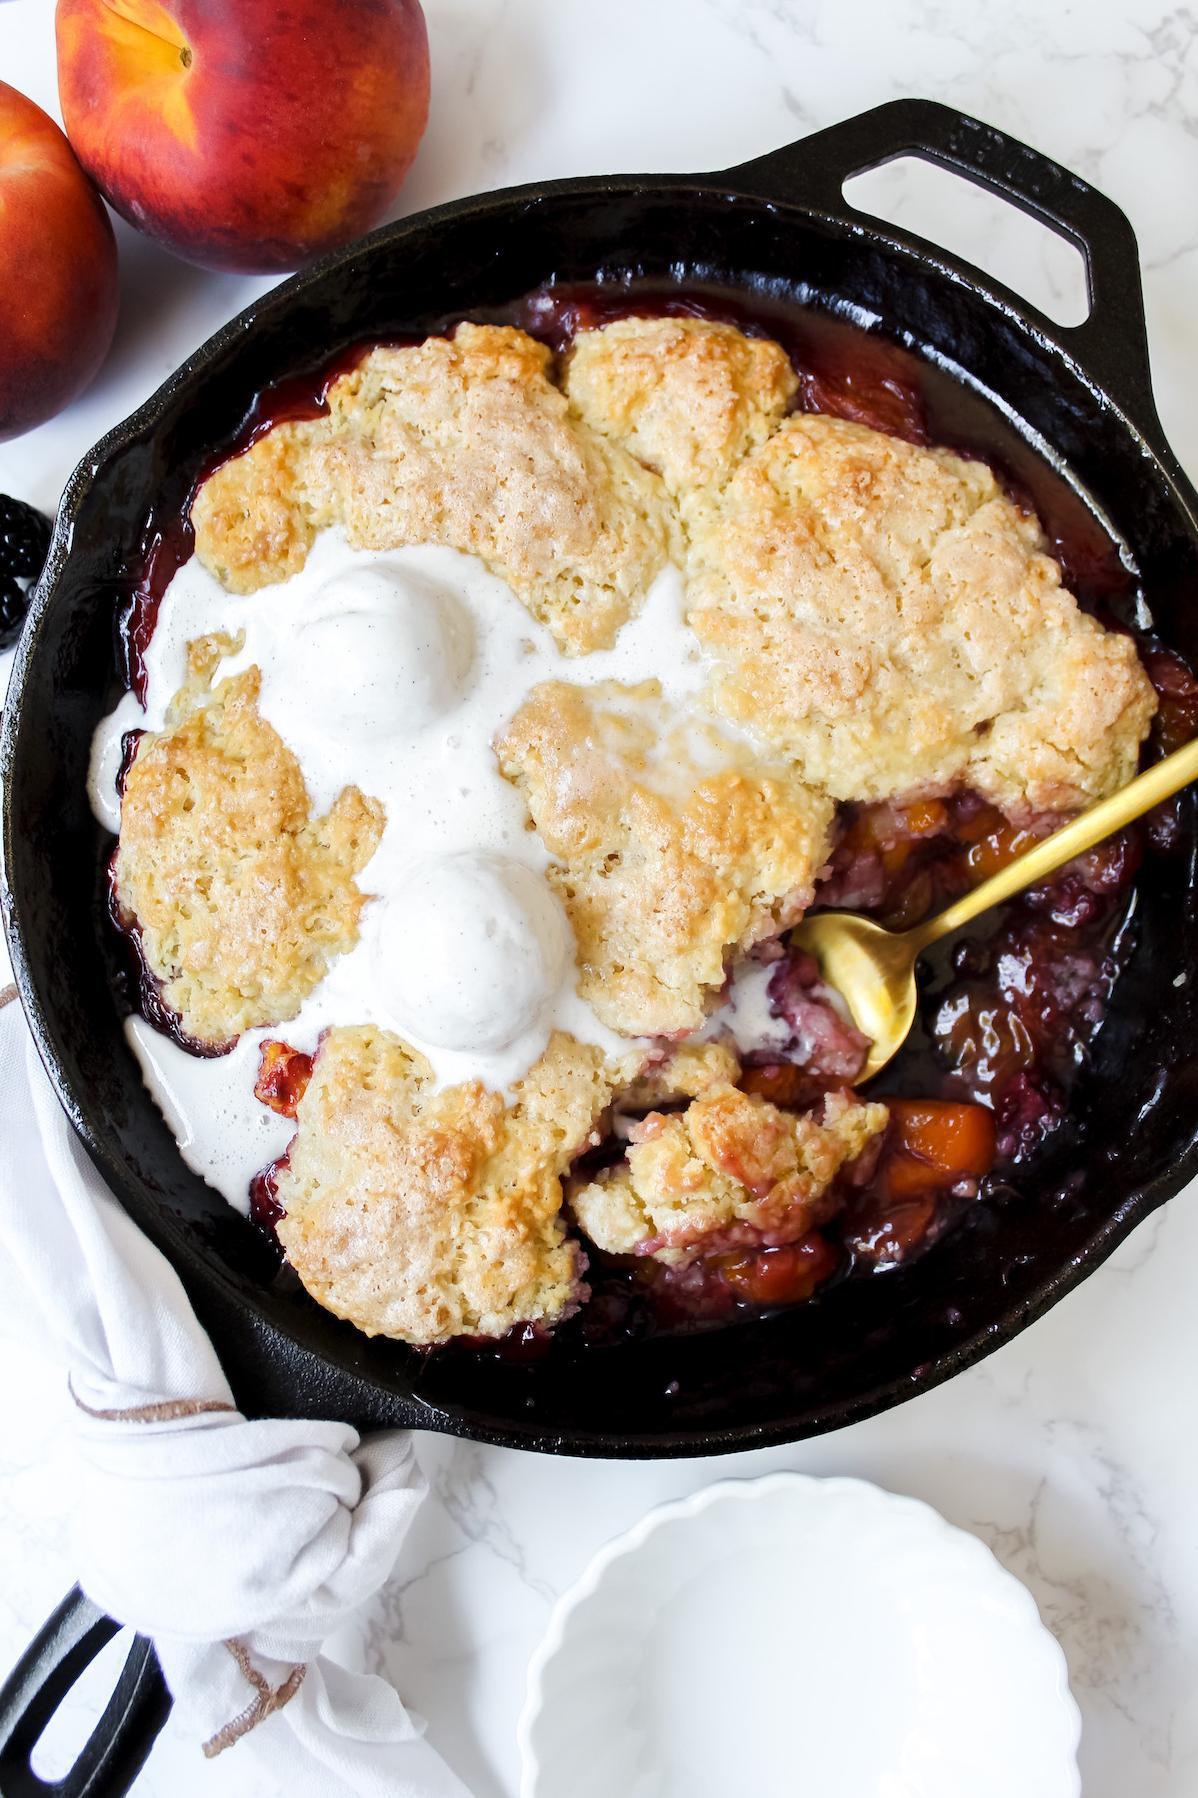  This vegan cobbler will prove to skeptics that plant-based desserts can be just as delicious as traditional ones.